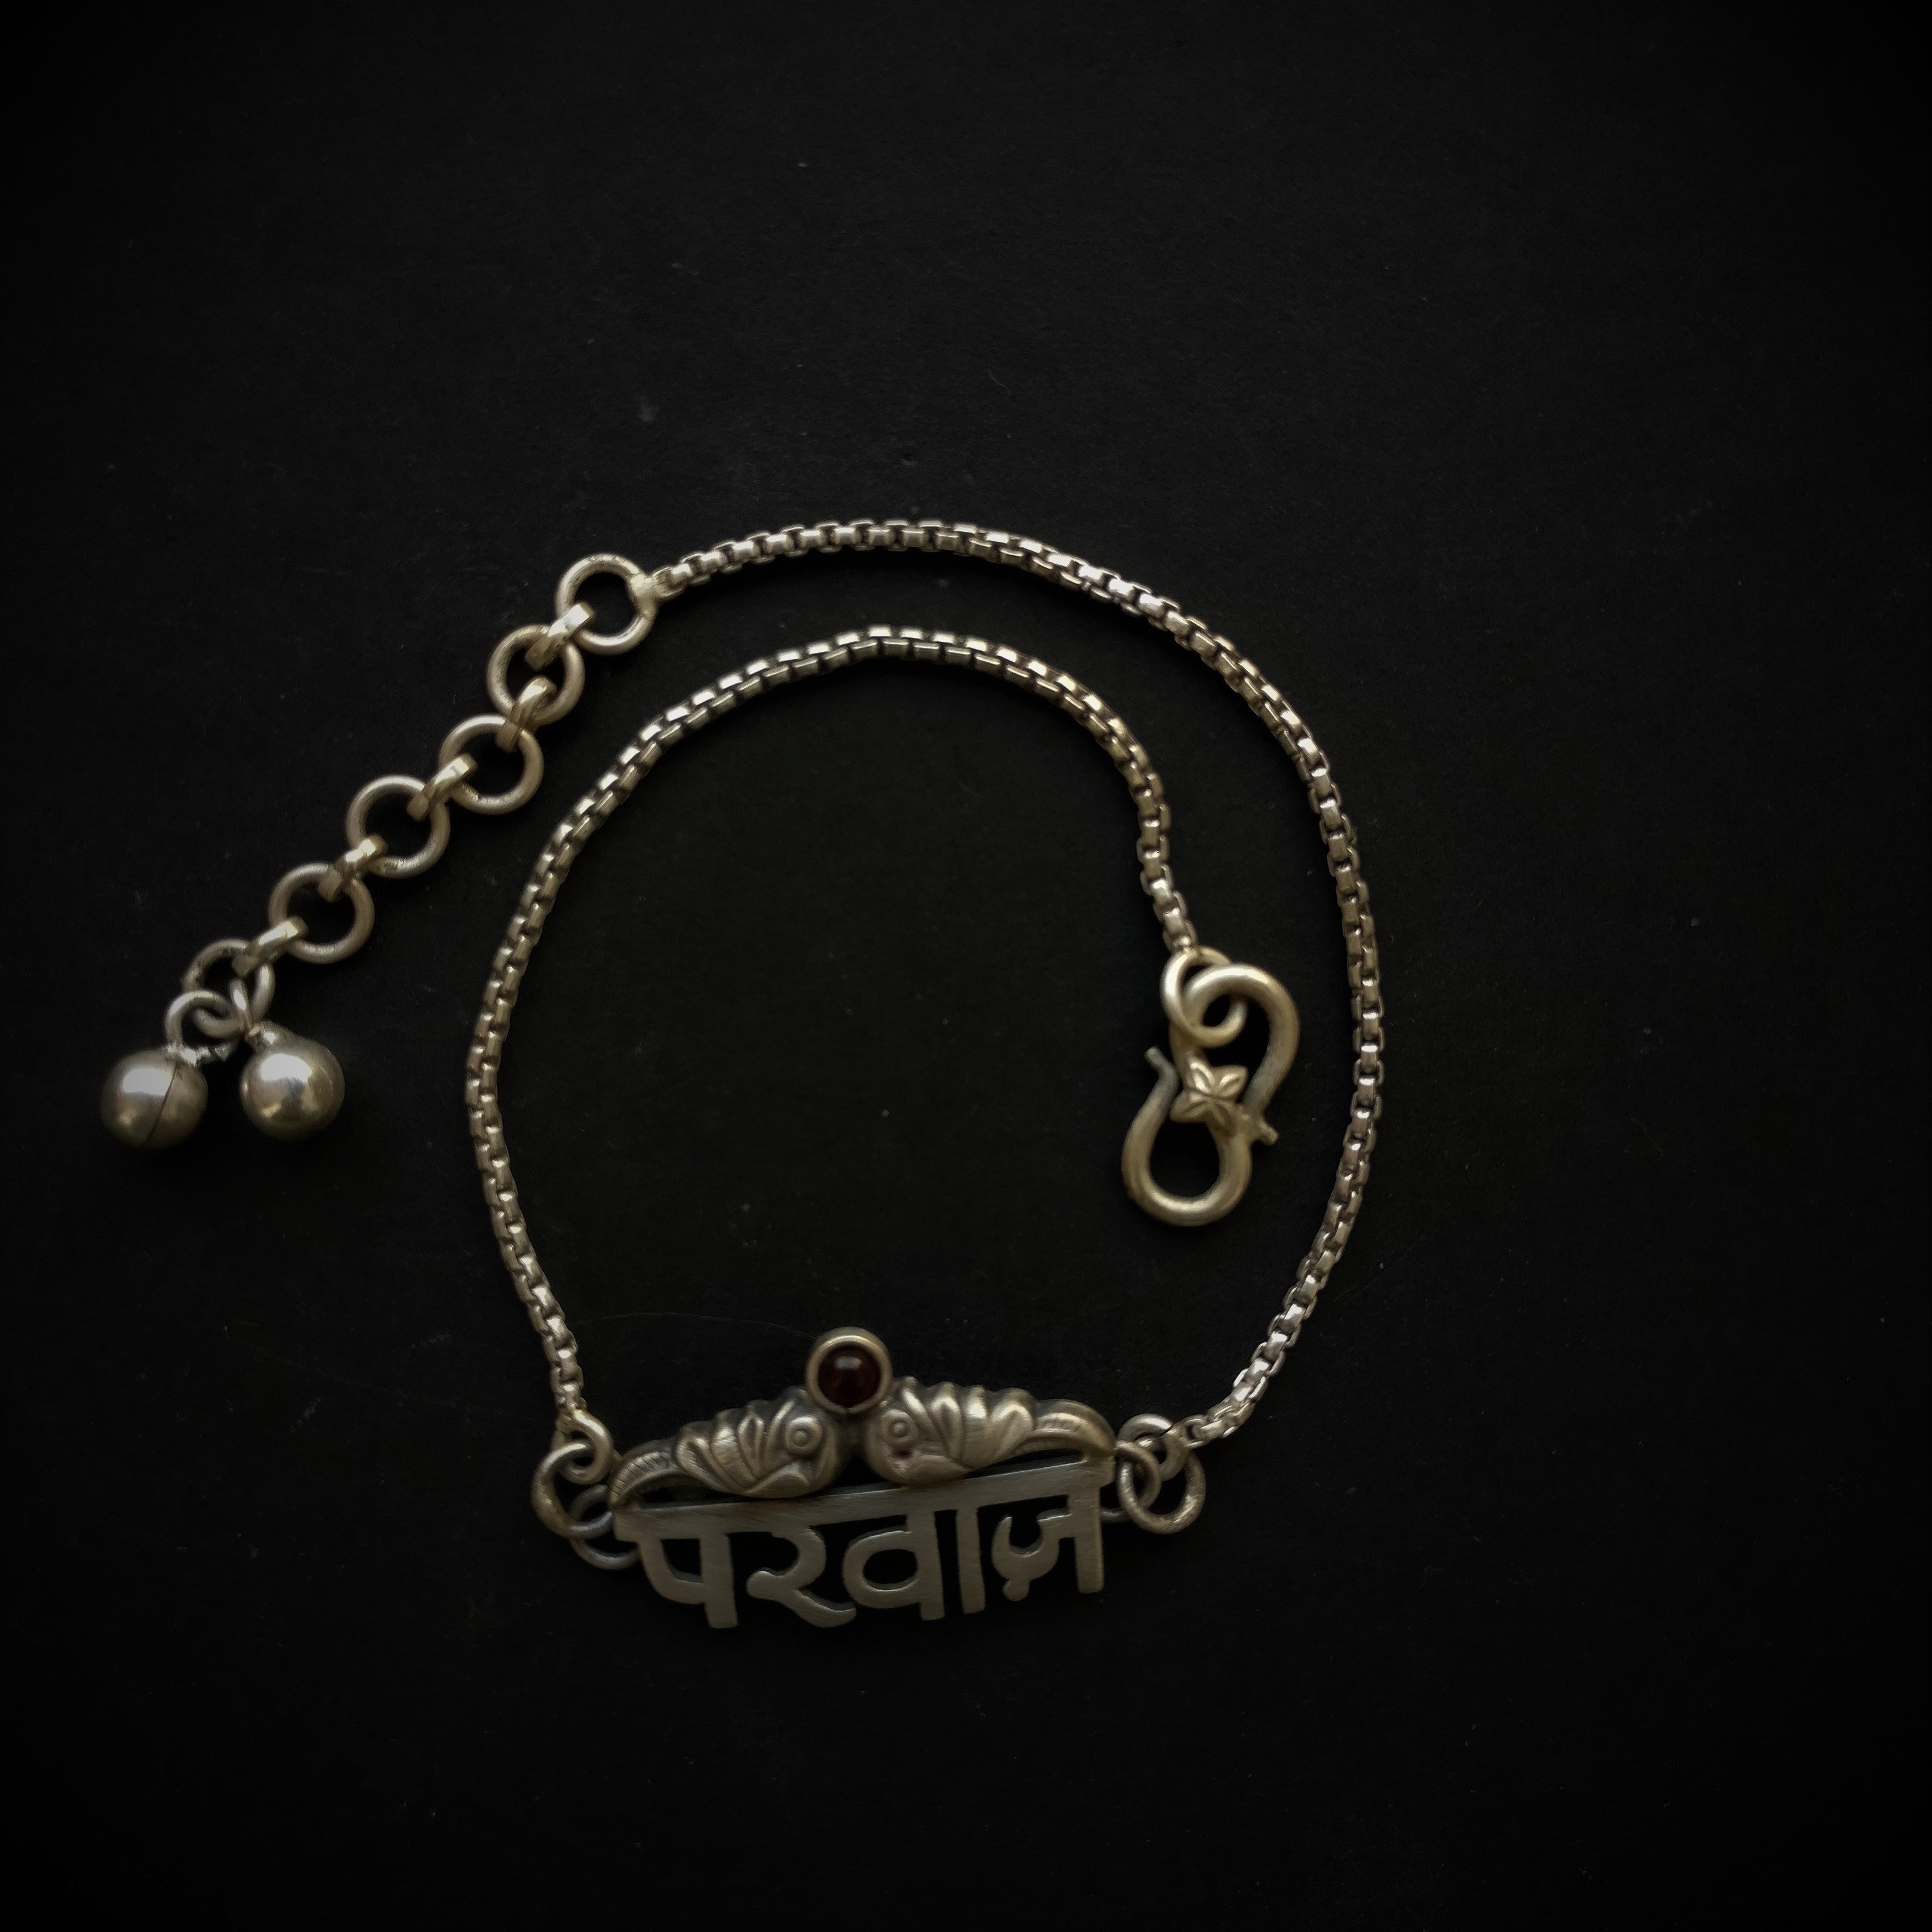 Latest Anklet Designs online by Quirksmith - Pravaaz Anklet